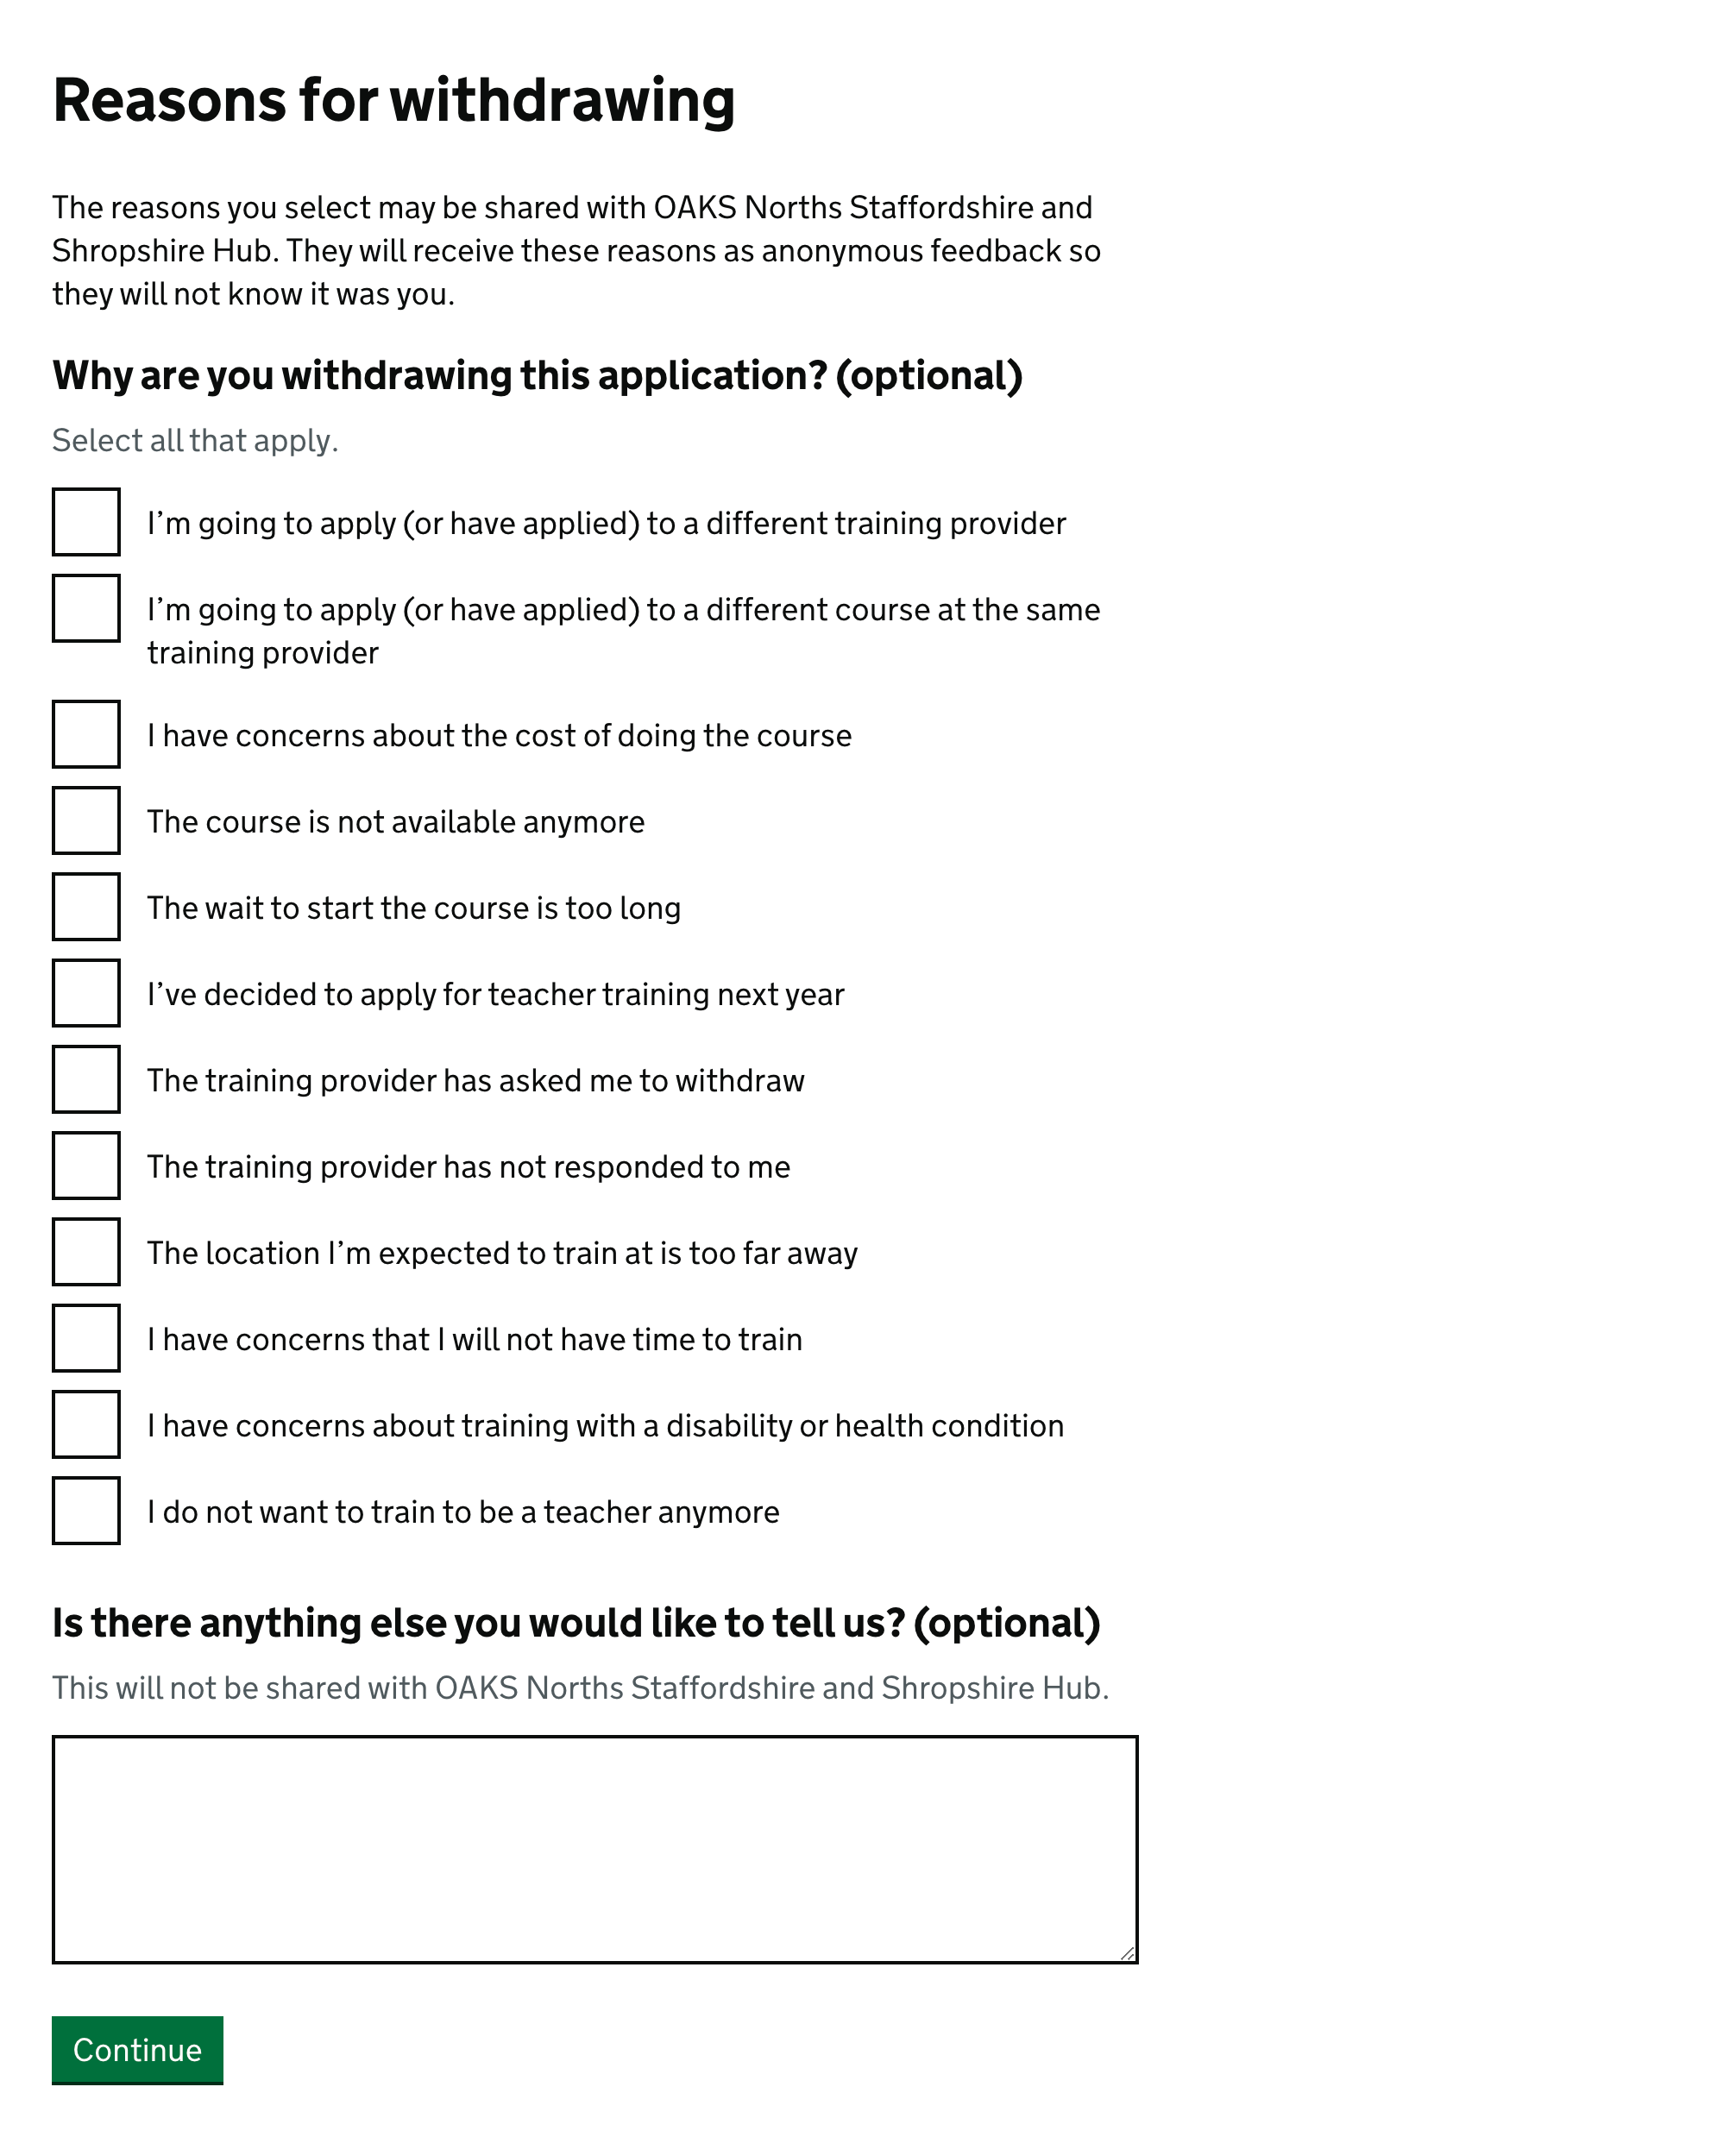 Screenshot showing a page with the title 'Reasons for withdrawing'. 2 questions are shown: 'Why are you withdrawing this application? (optional)' which has 12 options, each with a checkbox, and 'Is there anything else you would like to tell us? (optional)' which has a text field.